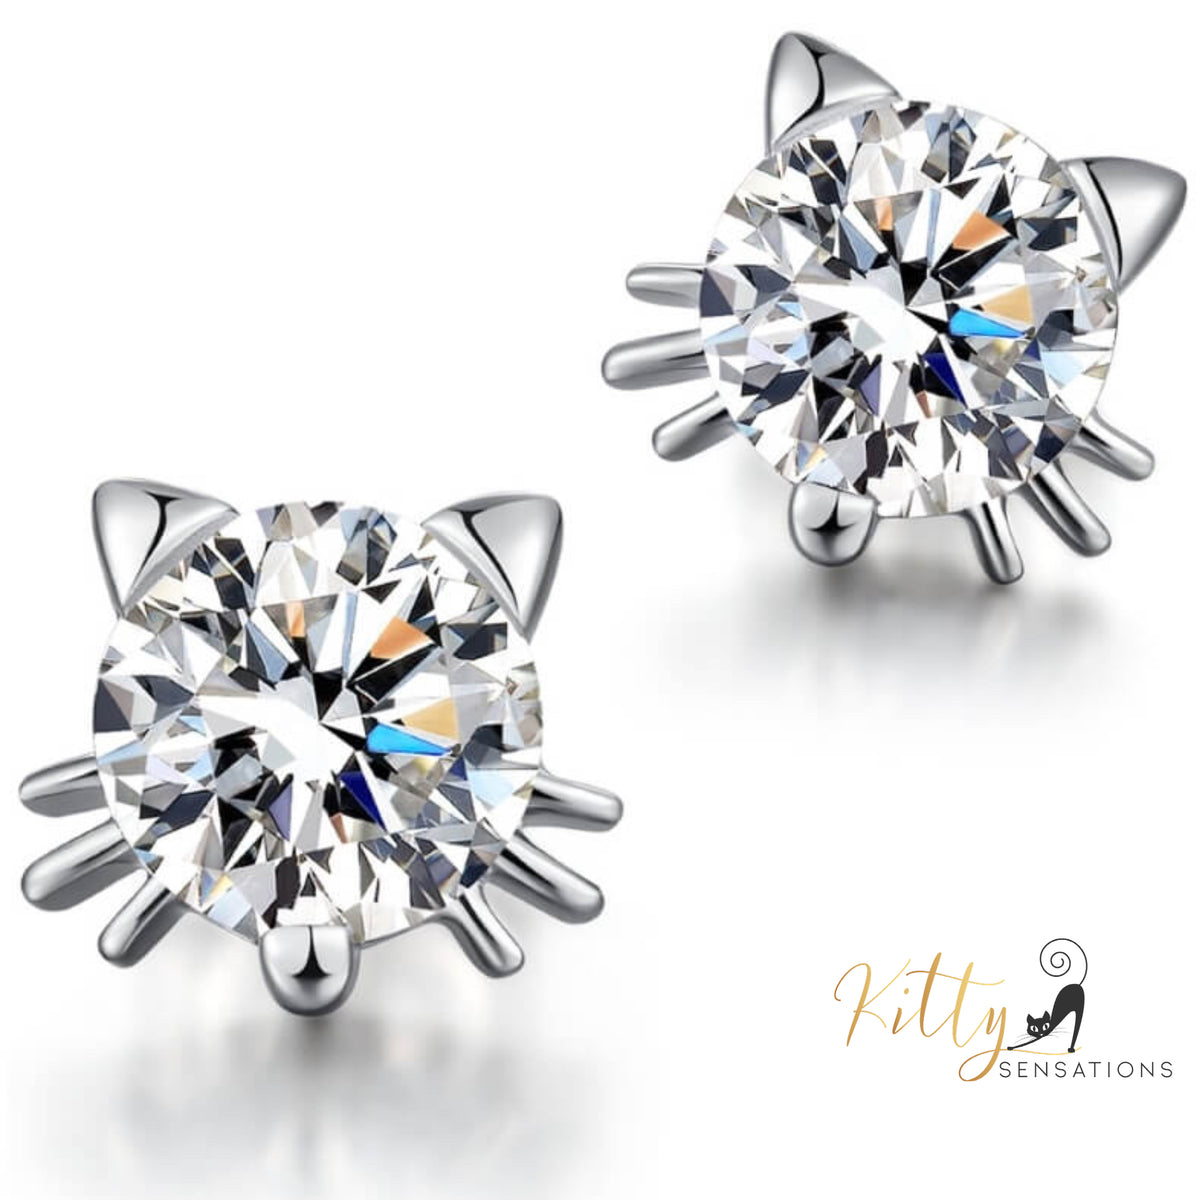 Cubic Zirconia Cat Earrings - Stud or Dangling - Your Choice! (Solid 925 Sterling Silver) ($19.95): https://www.kittysensations.com/products/silver-cat-earrings-with-a-cubic-zirconia?_pos=3&_psq=cubic+zirconia+cat+earr&_ss=e&_v=1.0